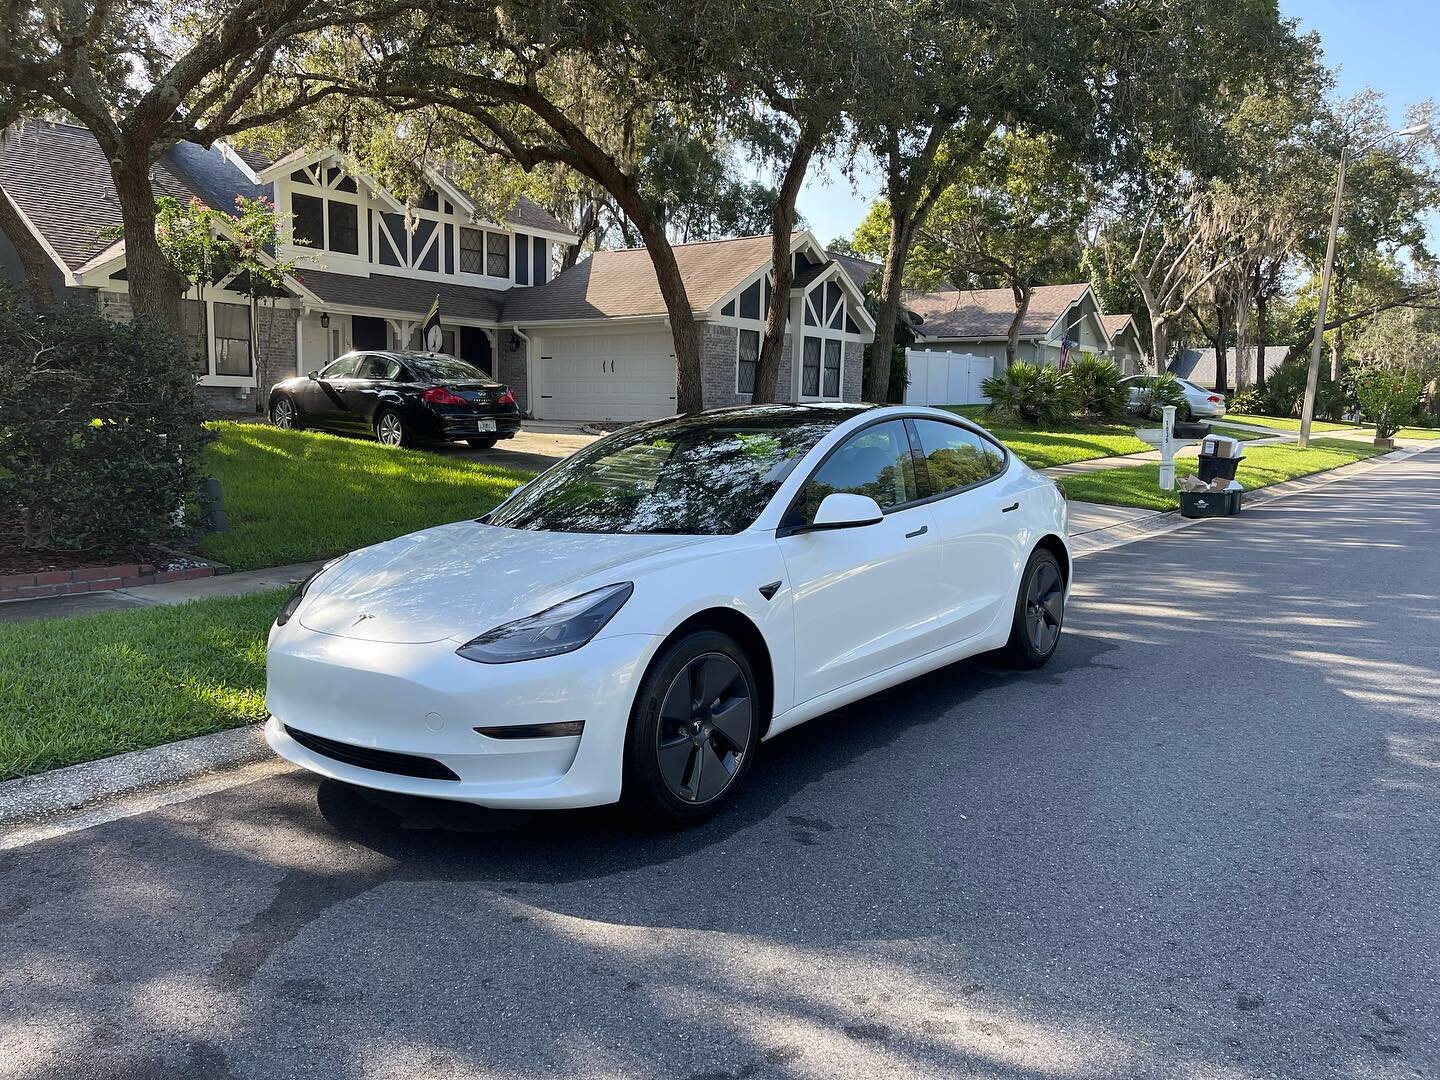 Brand new Tesla Model 3 received a decontamination wash and a sealant to protect the exterior for months of protection! 🧊💎